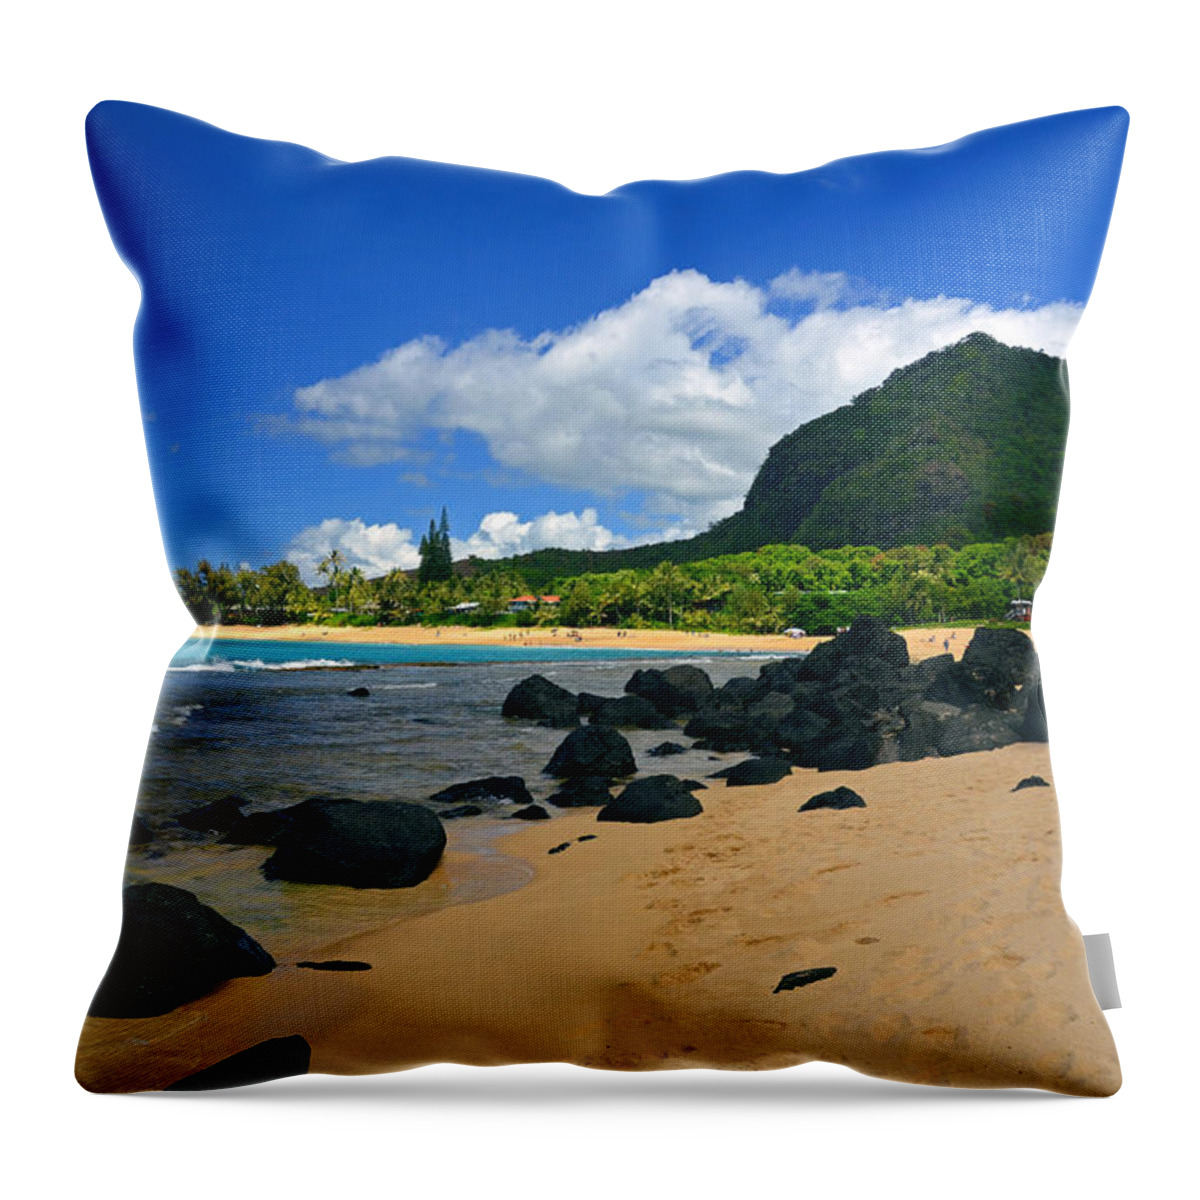 Hawaii Throw Pillow featuring the photograph Picture Perfect Haena Beach by Marie Hicks